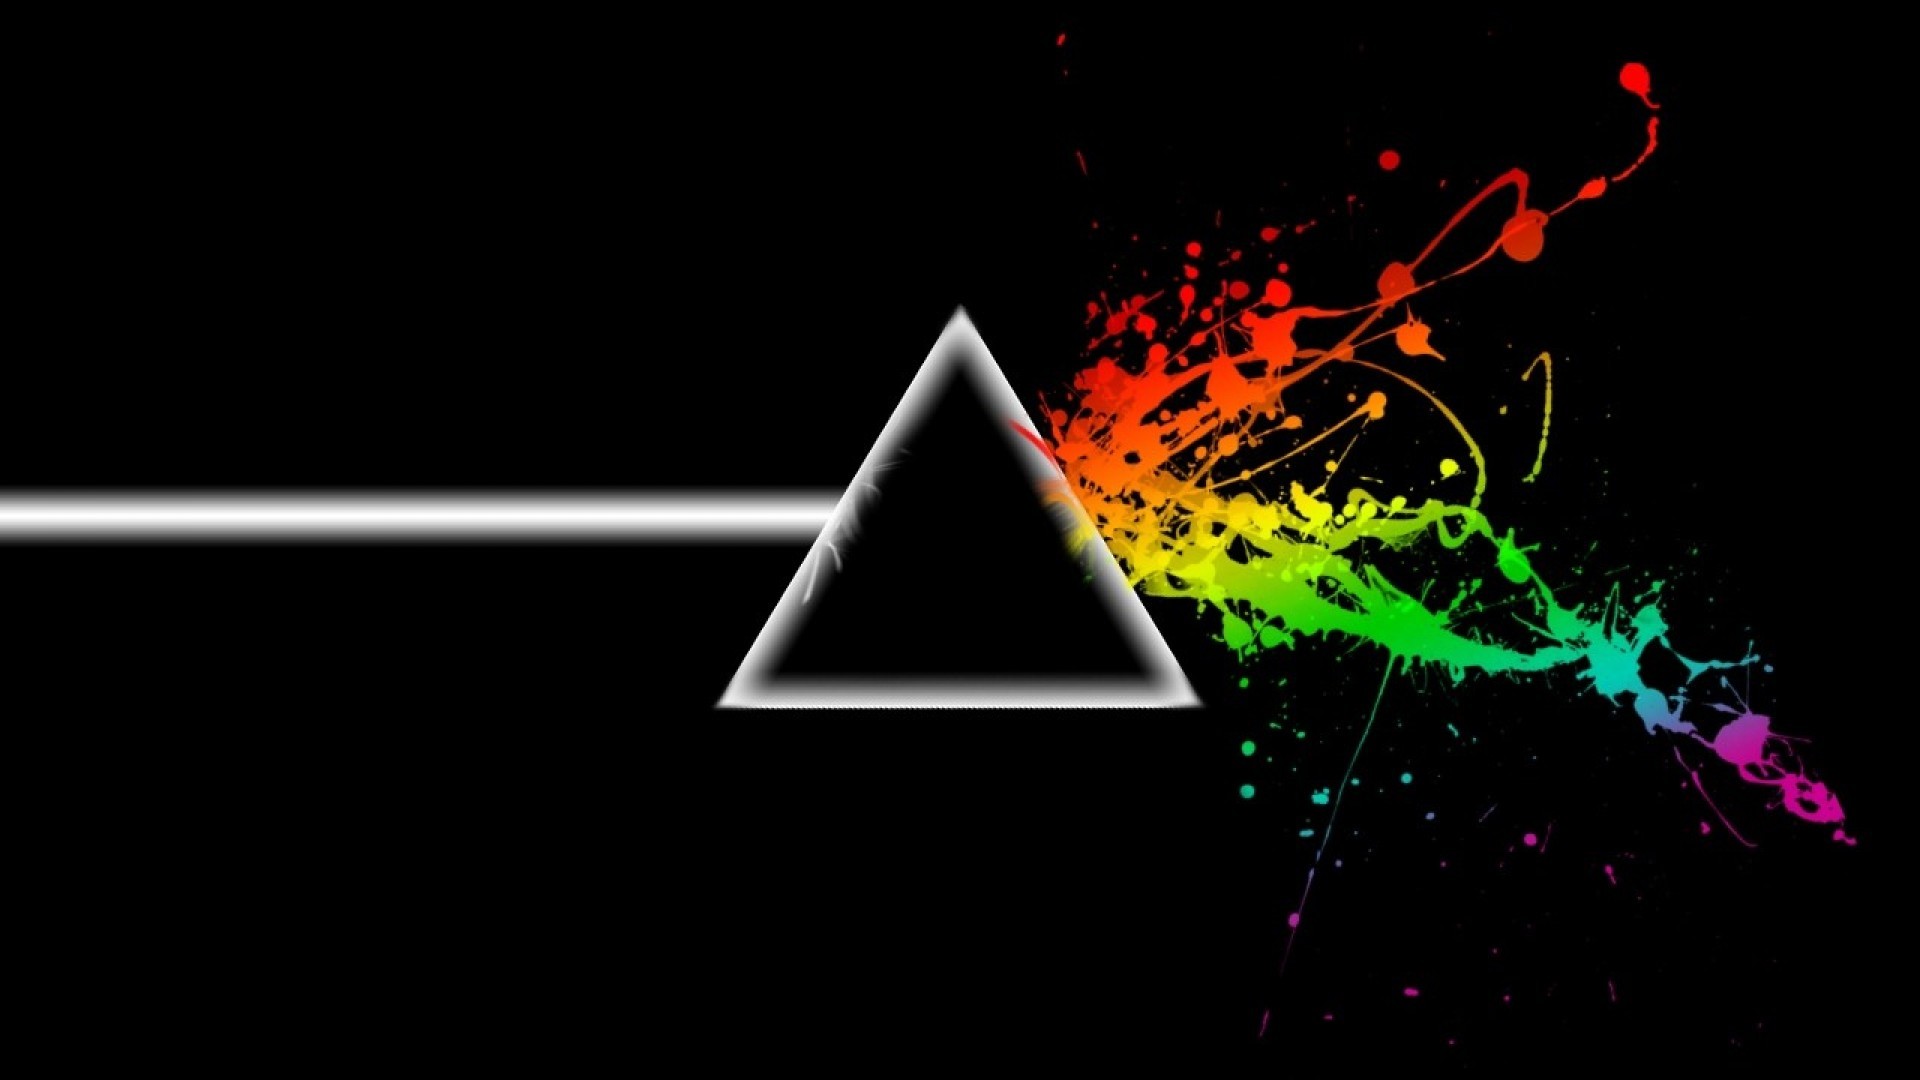 Wallpaper The Dark Side of The Moon Pink Floyd Album Phonograph Record  lp Record Background  Download Free Image